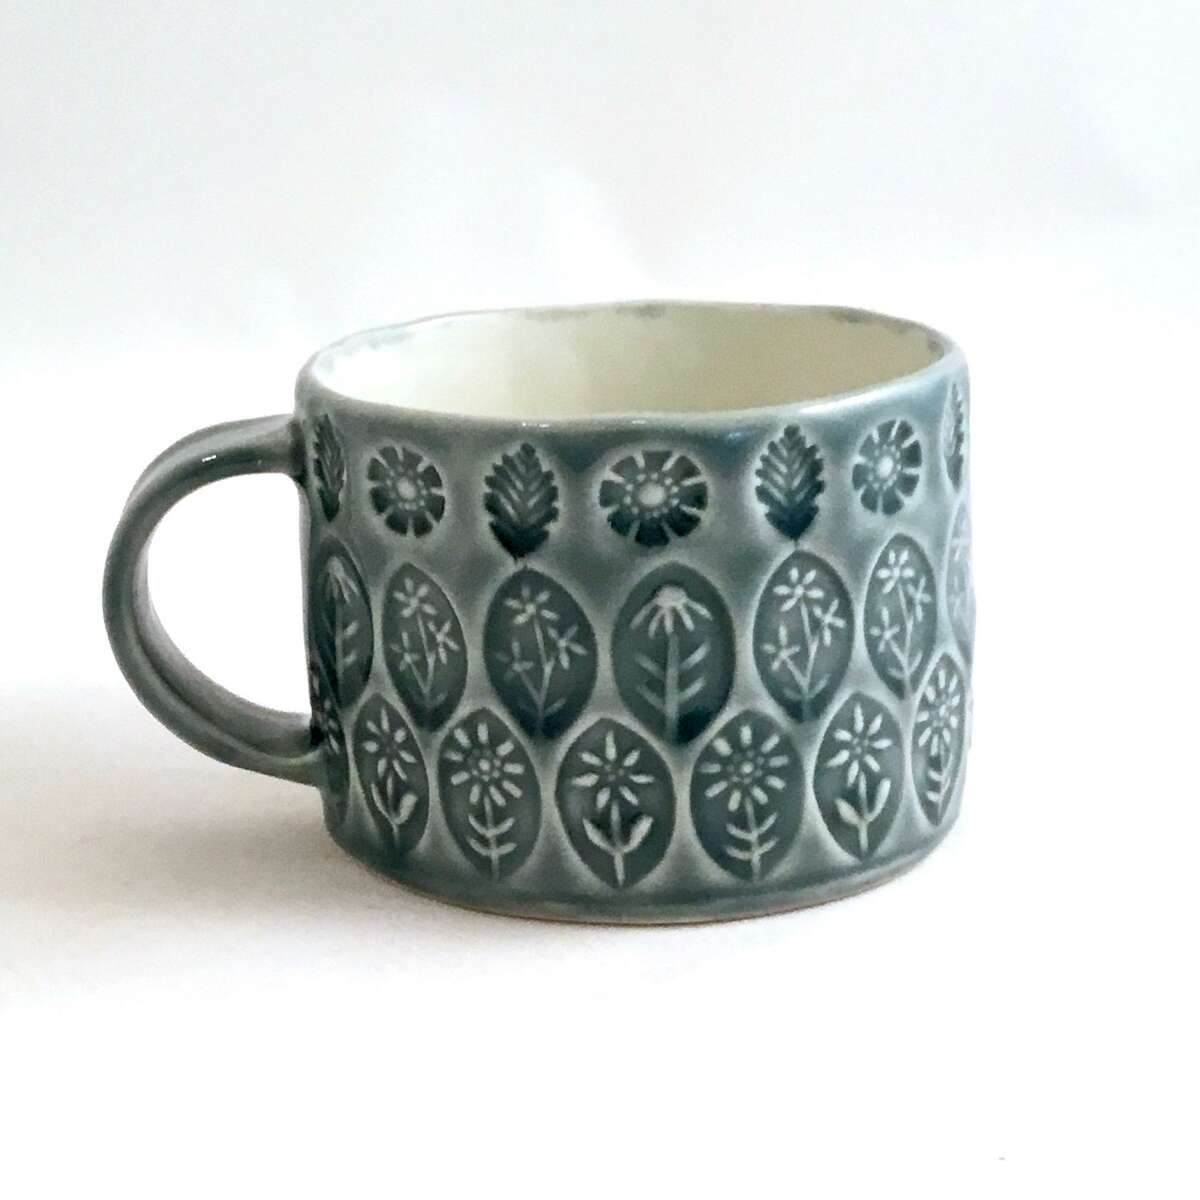 "That certain shadow of Christmas" the exhibition and sale begin Thanksgiving weekend at the Washington Art Association in Washington Depot, CT.  Pictured is a ceramic mug by Missy Stevens.